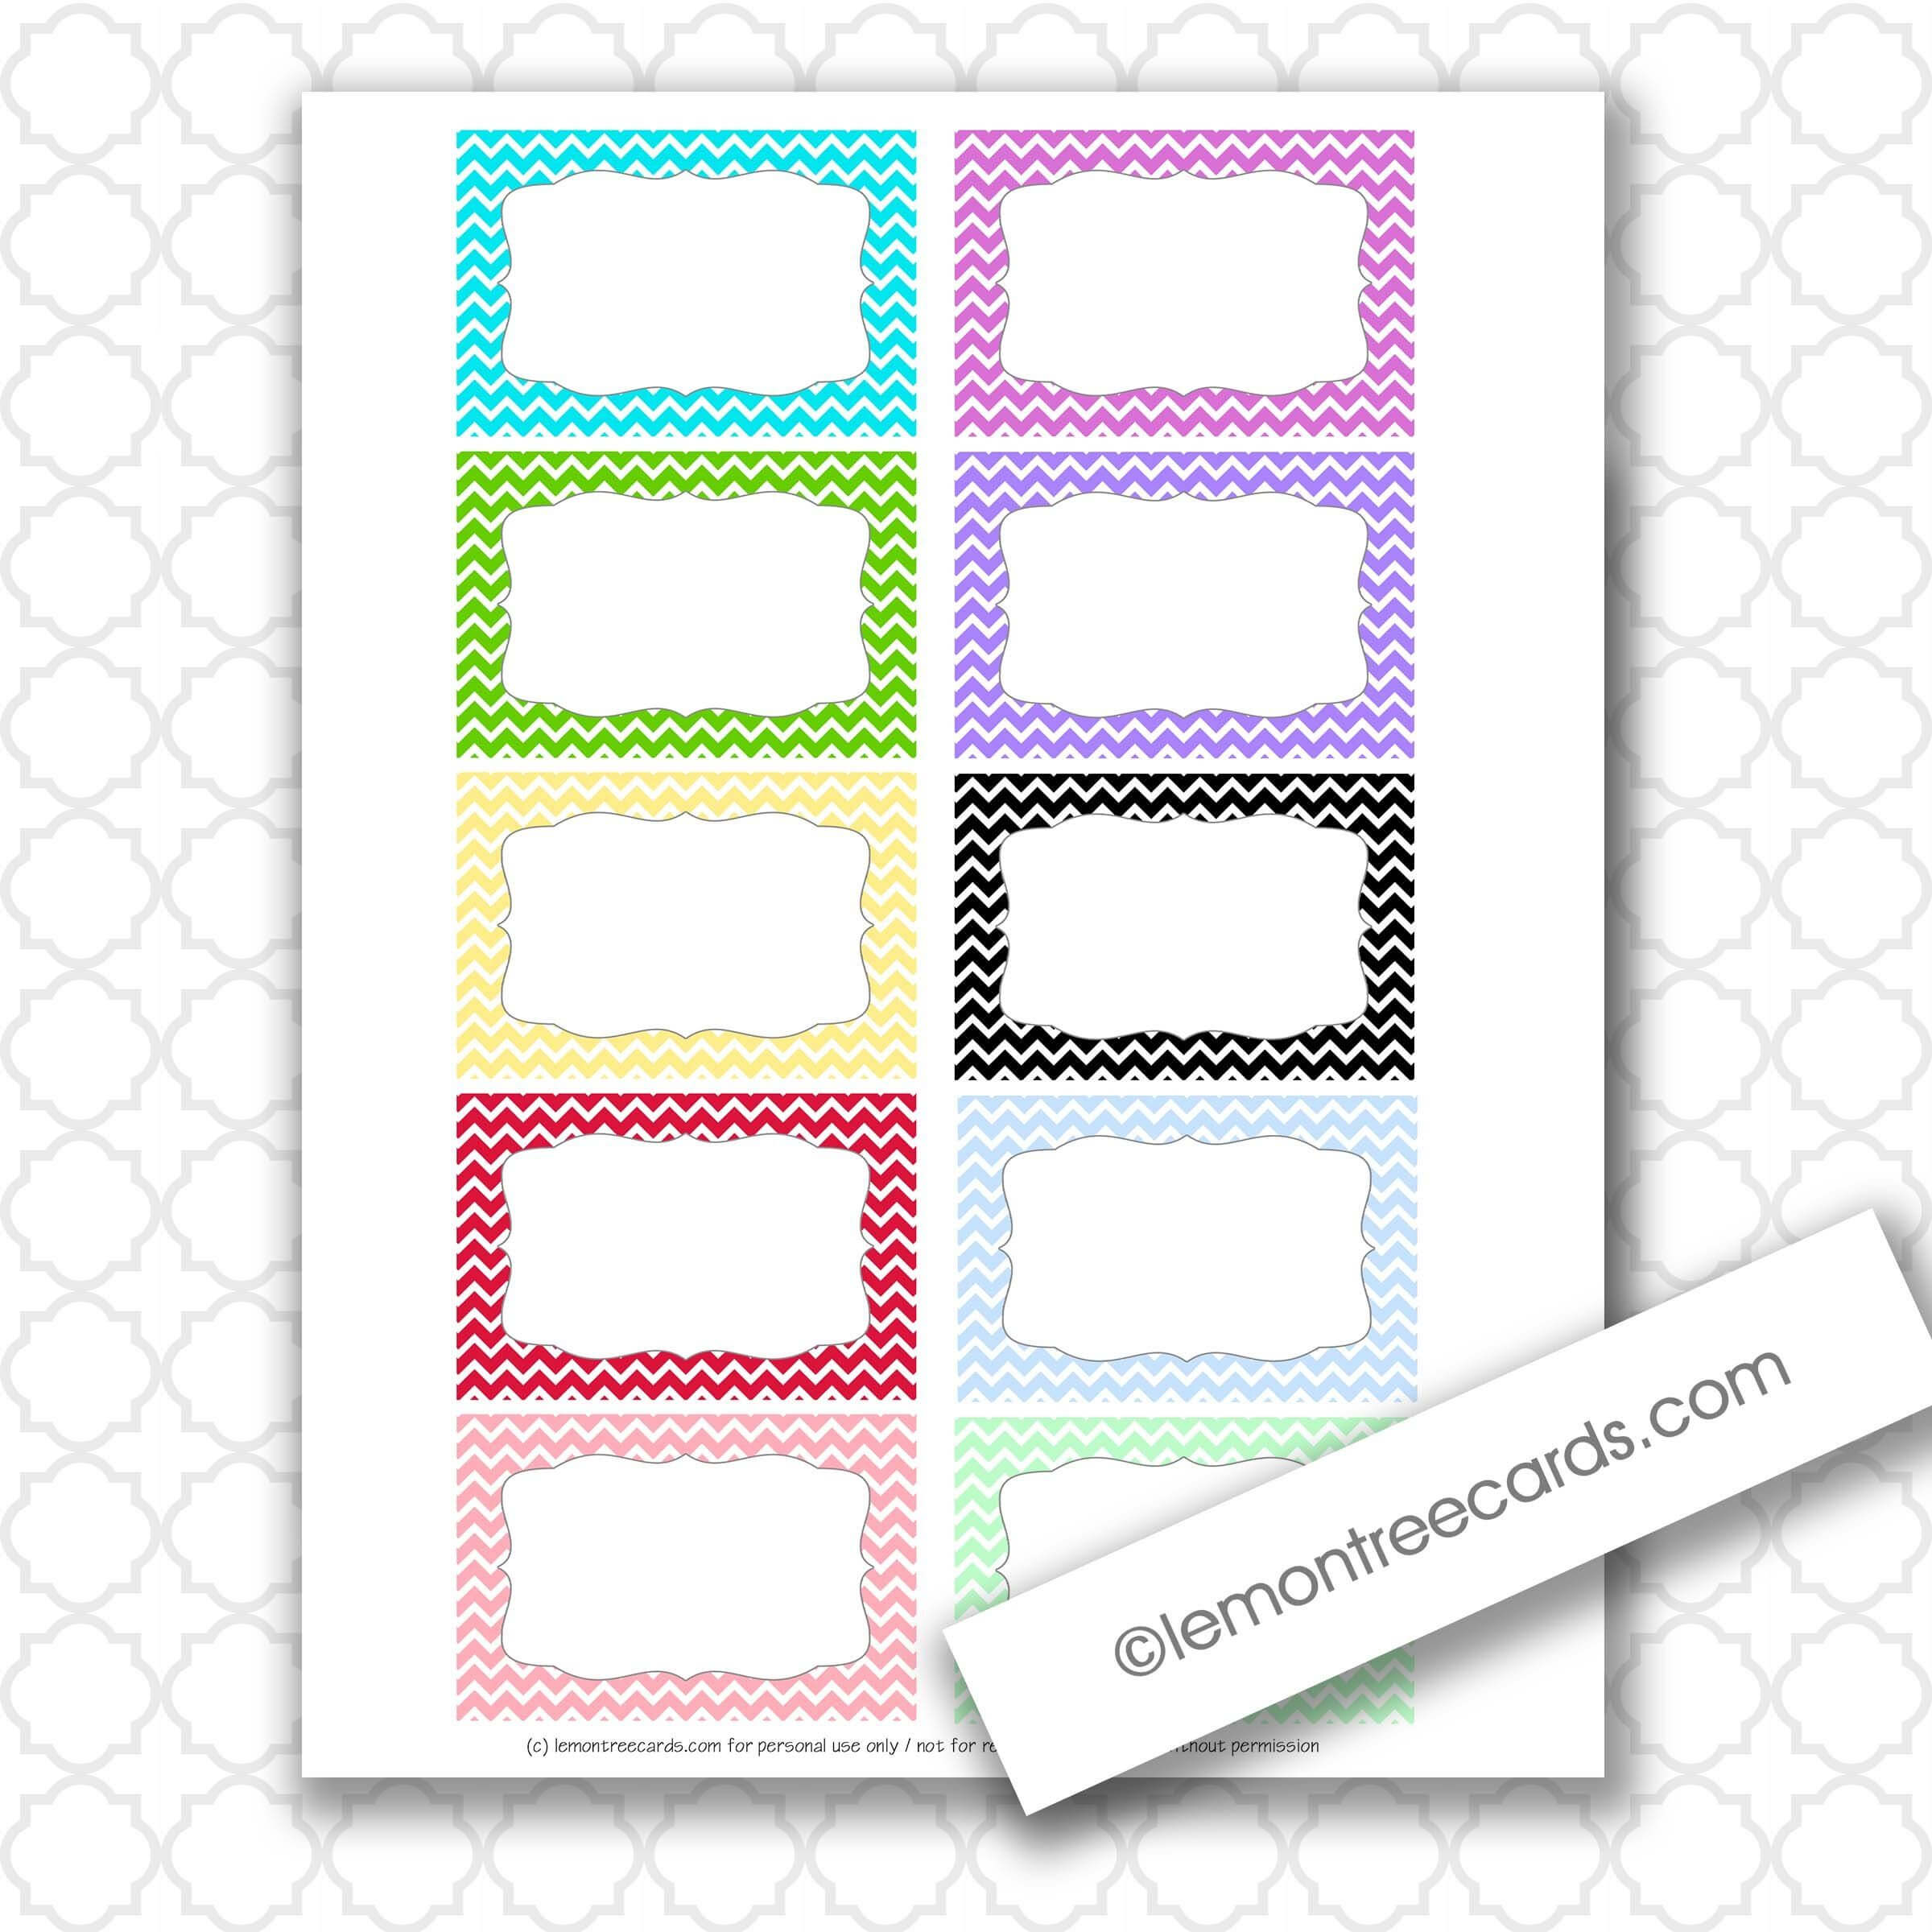 007 Free Index Card Template Ideas Surprising Printable 4X6 Inside 4X6 Photo Card Template Free